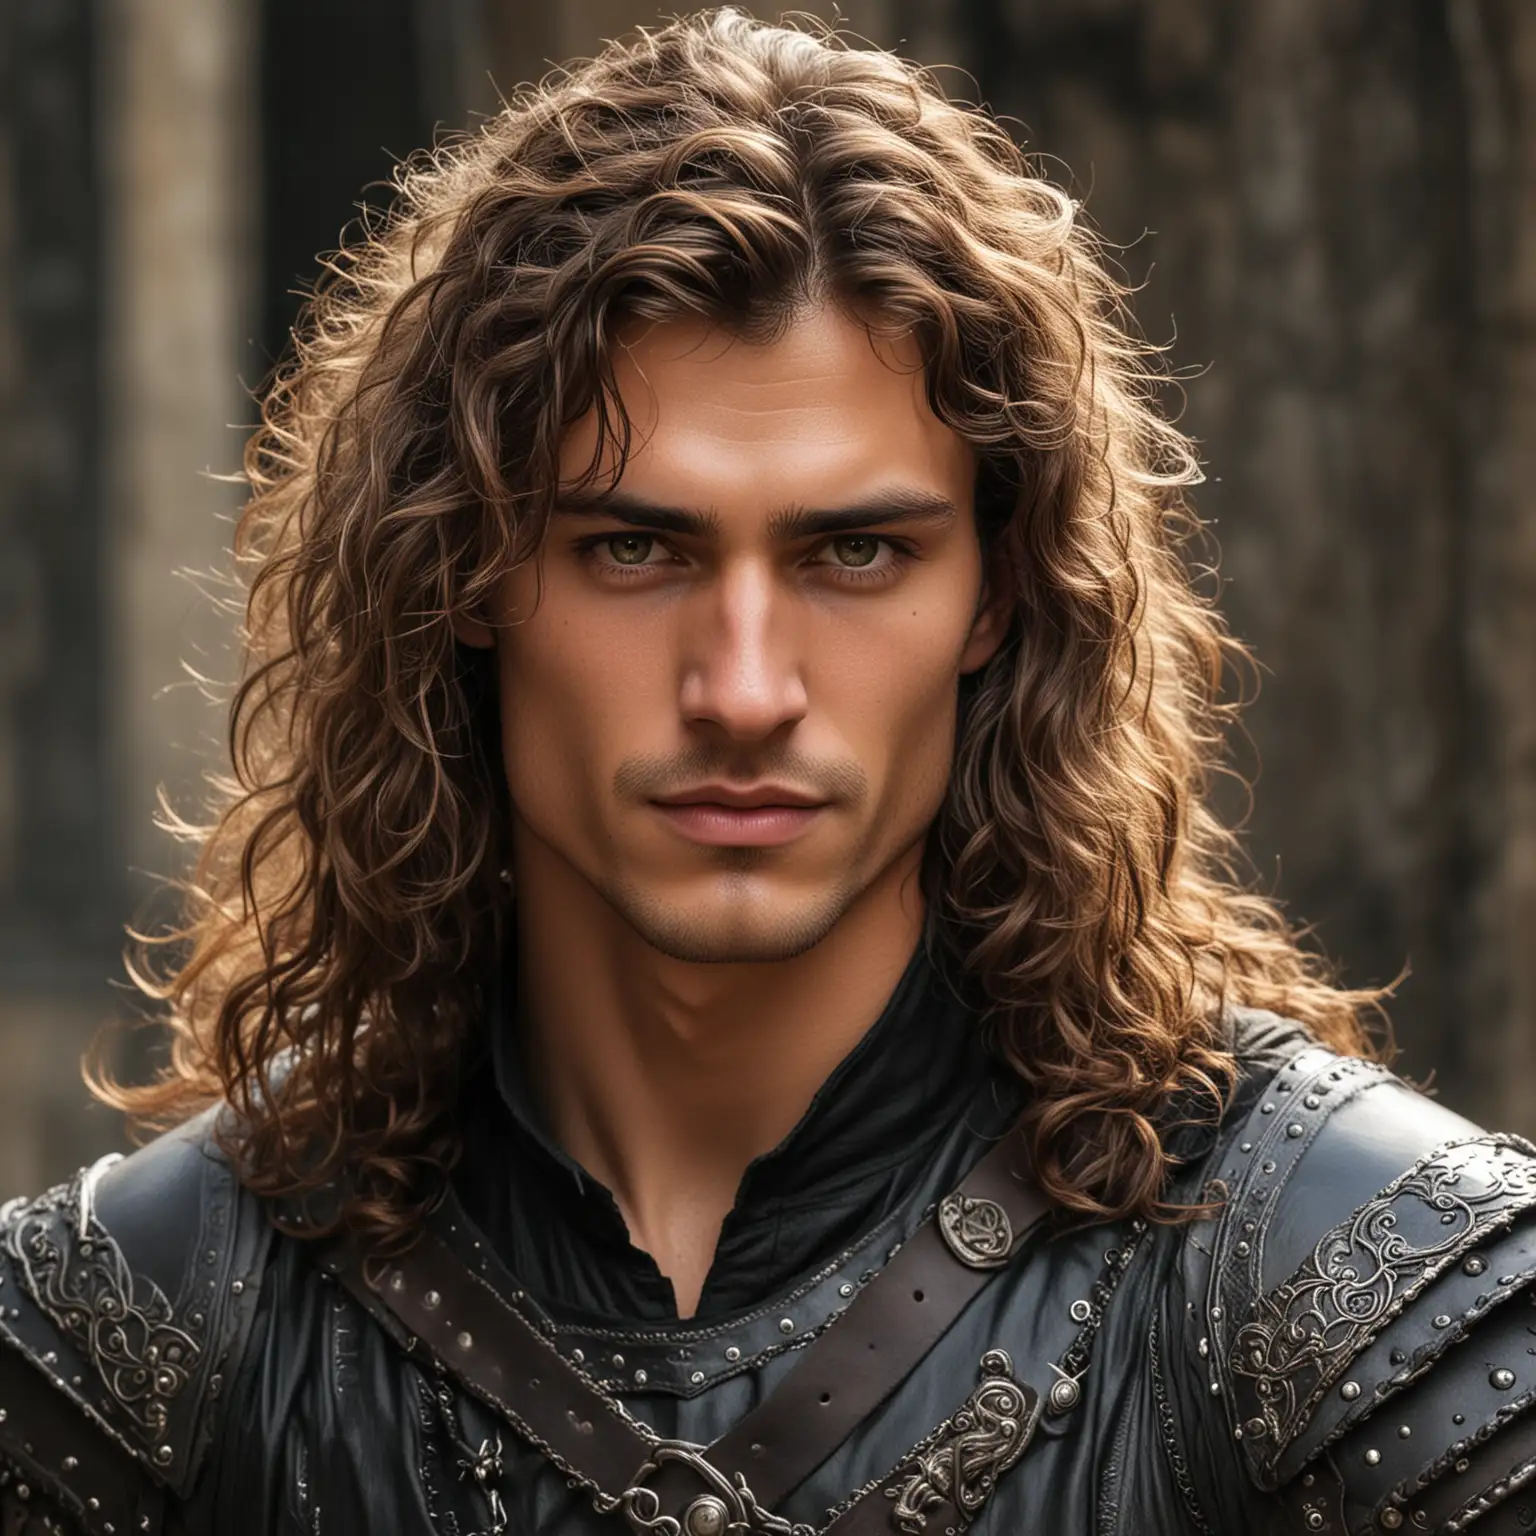 Tall and muscular build beautiful man
Sharp and angular features, including a strong jawline. He is smirking.
Piercing eyes that hold hidden depths of emotion and experience.
Dark, tousled, or unkempt, long, curly hair.
Tan golden skin
He had an intimidating presence with a certain vulnerability in his gaze. He is wearing black fighting leather.. Medieval, dark fantasy poster, full body illustration